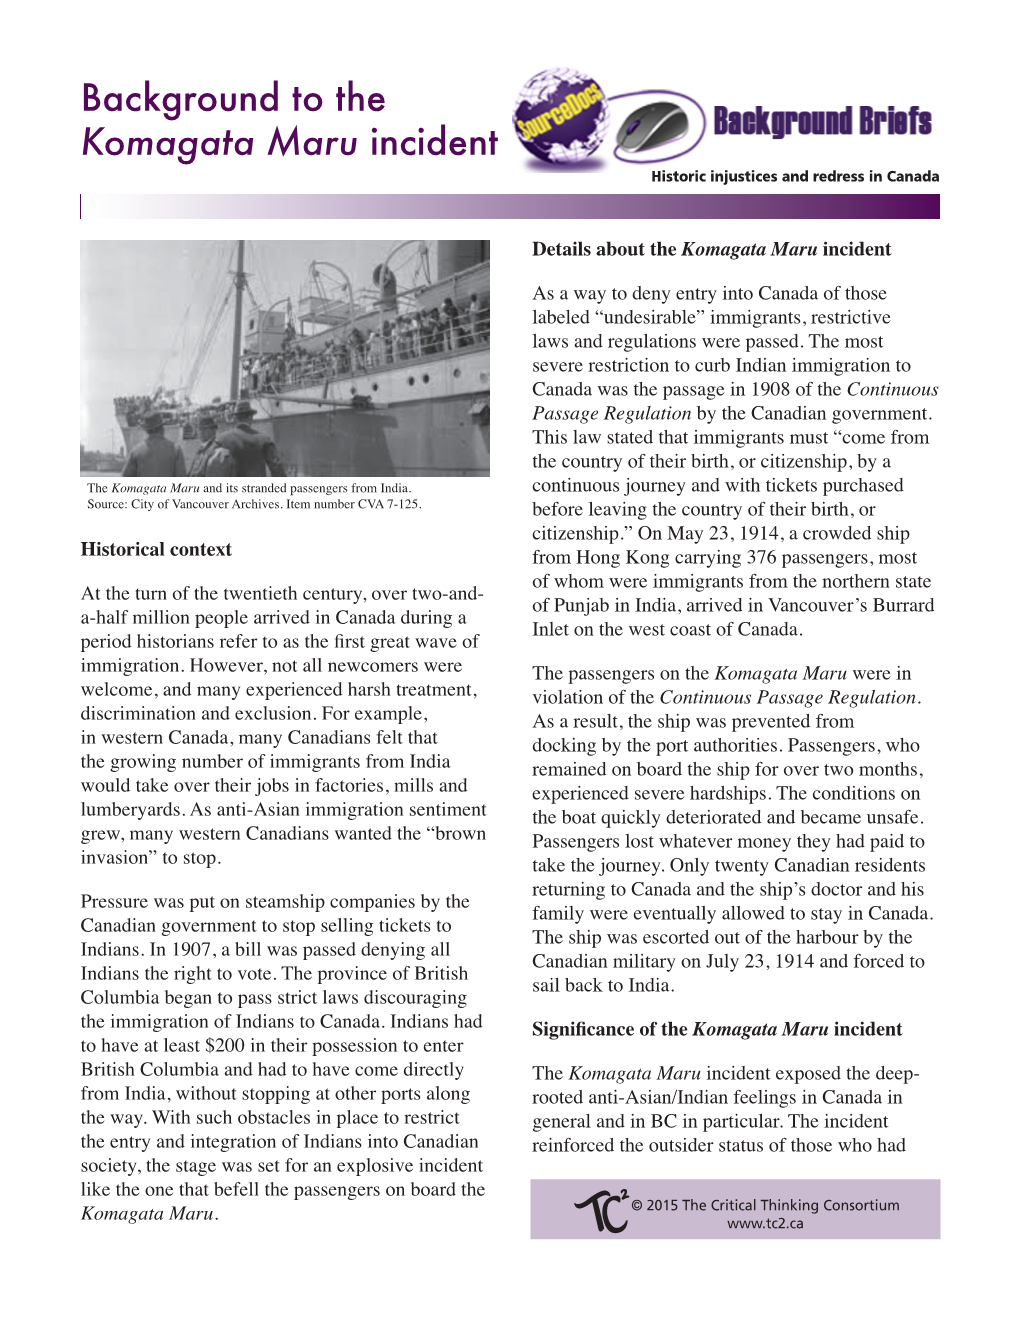 Background to the Komagata Maru Incident Historic Injustices and Redress in Canada